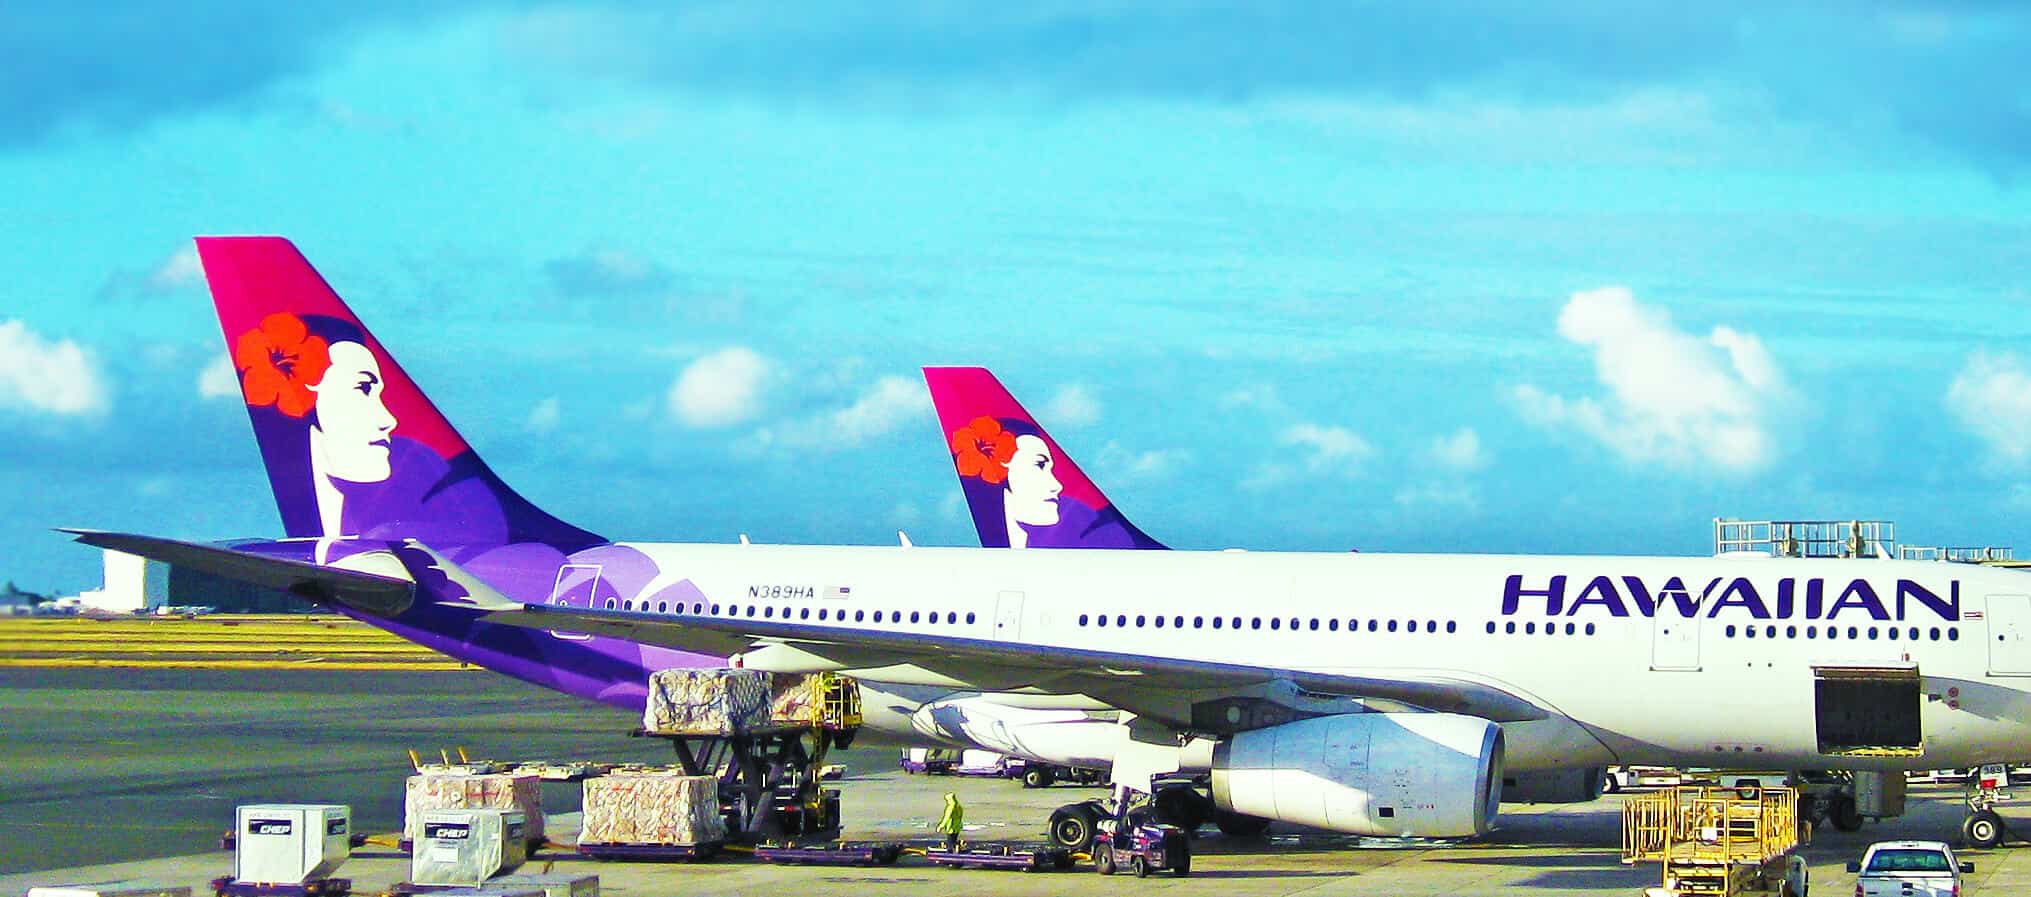 Hawaaian airlines planes